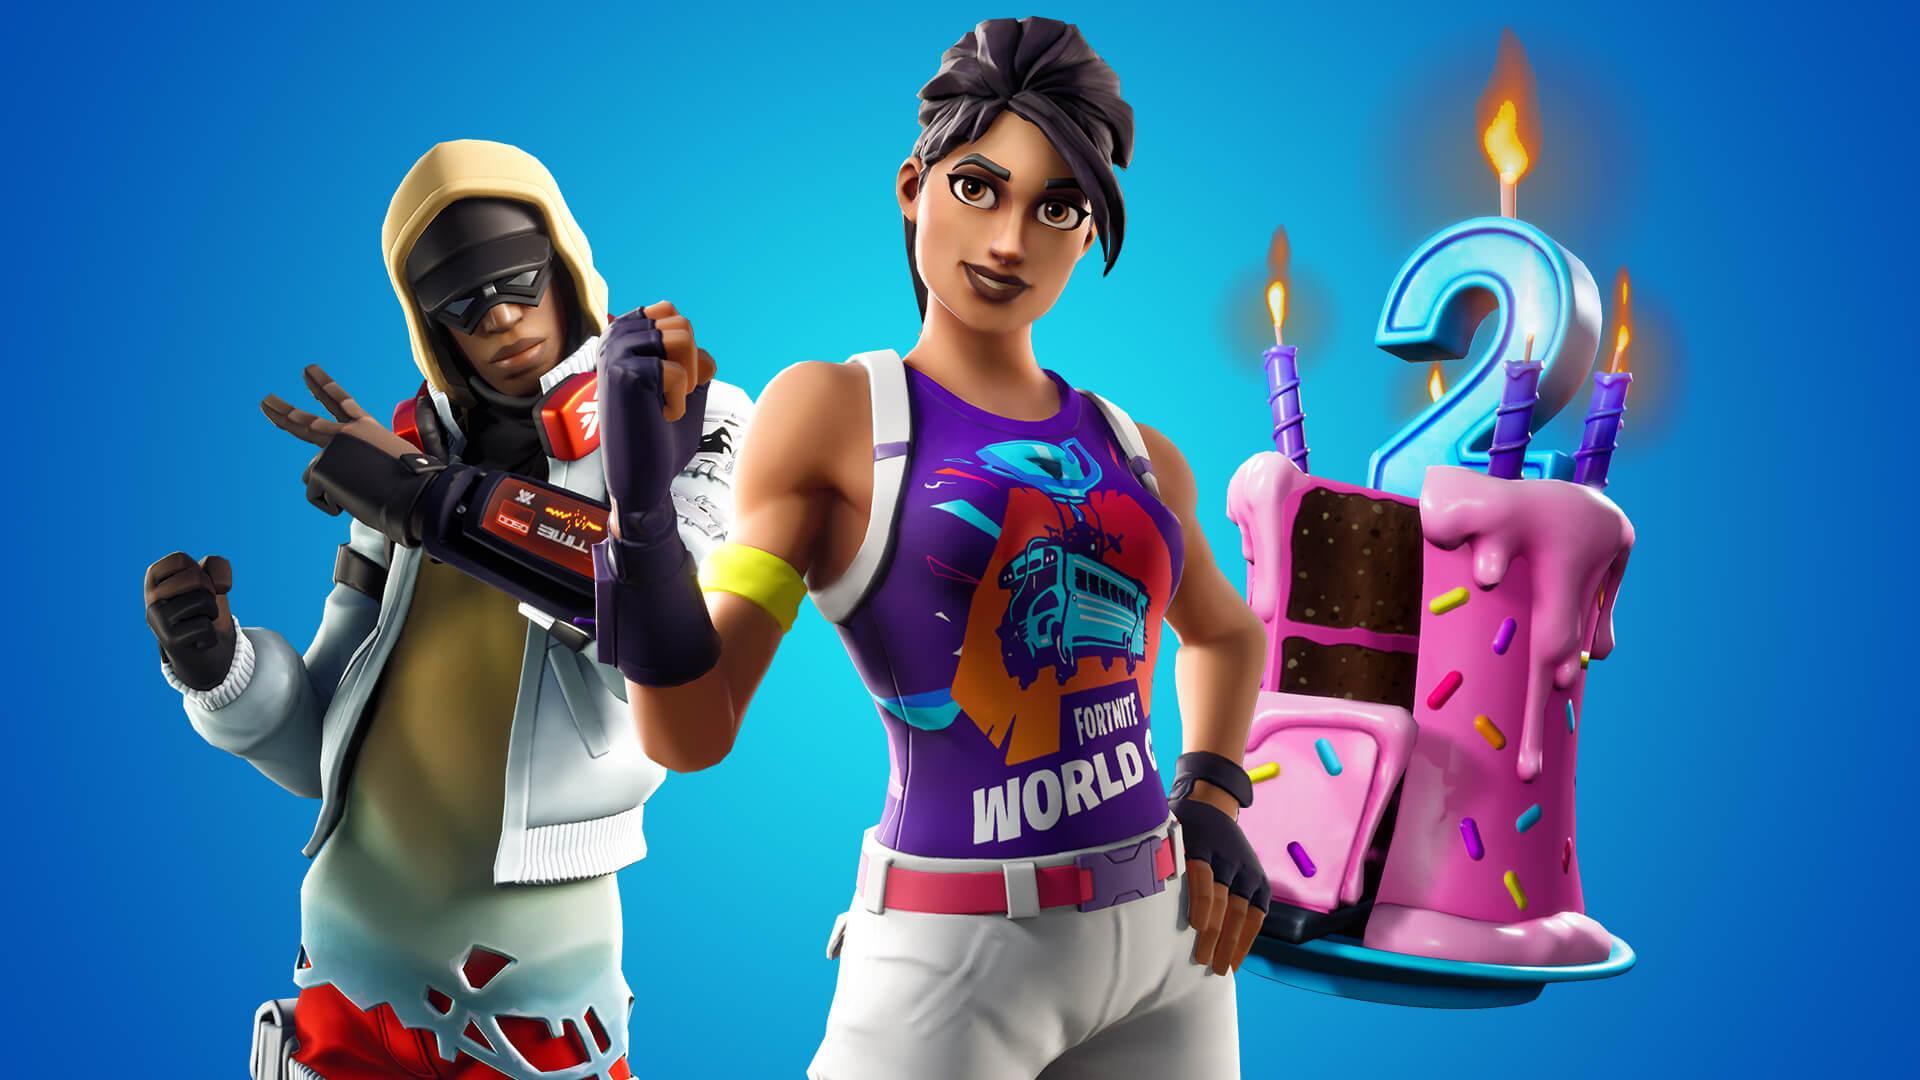 New Outfits for Fortnite: World Cup Editions